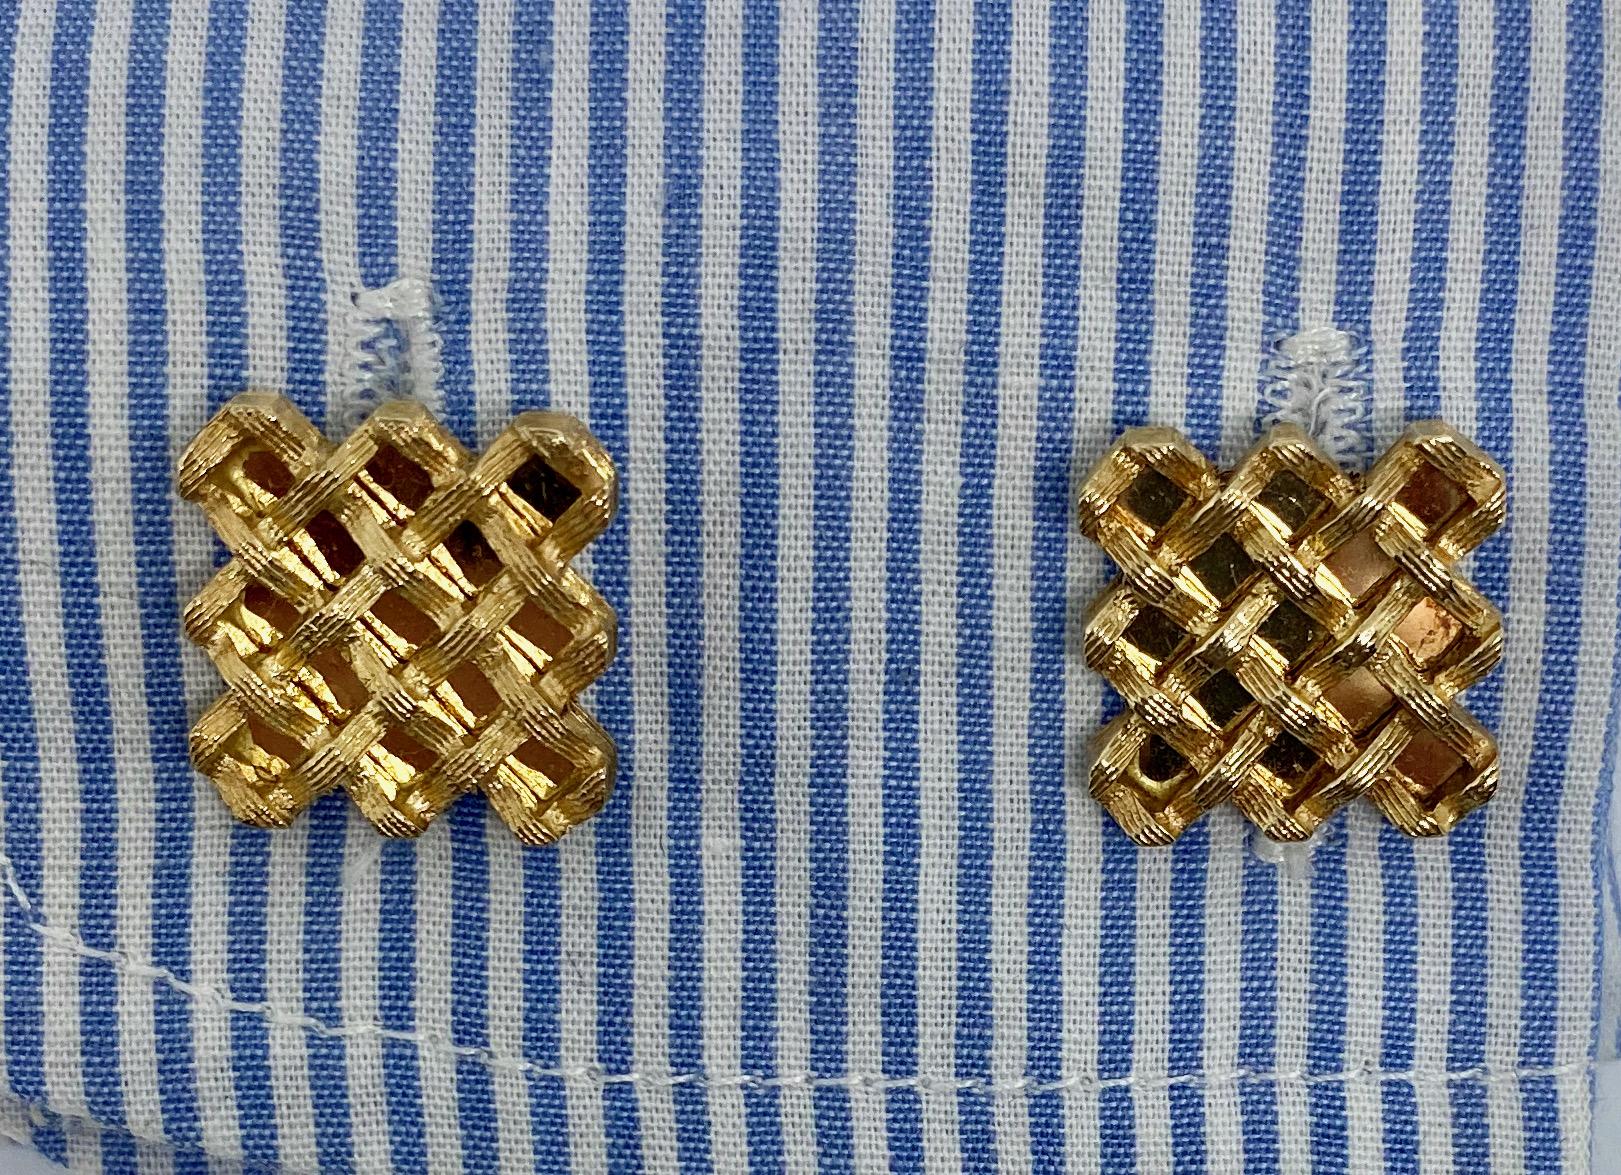 A pair of cufflinks featuring a handsome open basketweave pattern in 14K yellow gold.

The gold on the faces and backs has been painstakingly hand-engraved; the workmanship is excellent. The toggle backs have a good, firm snap, making the cufflinks